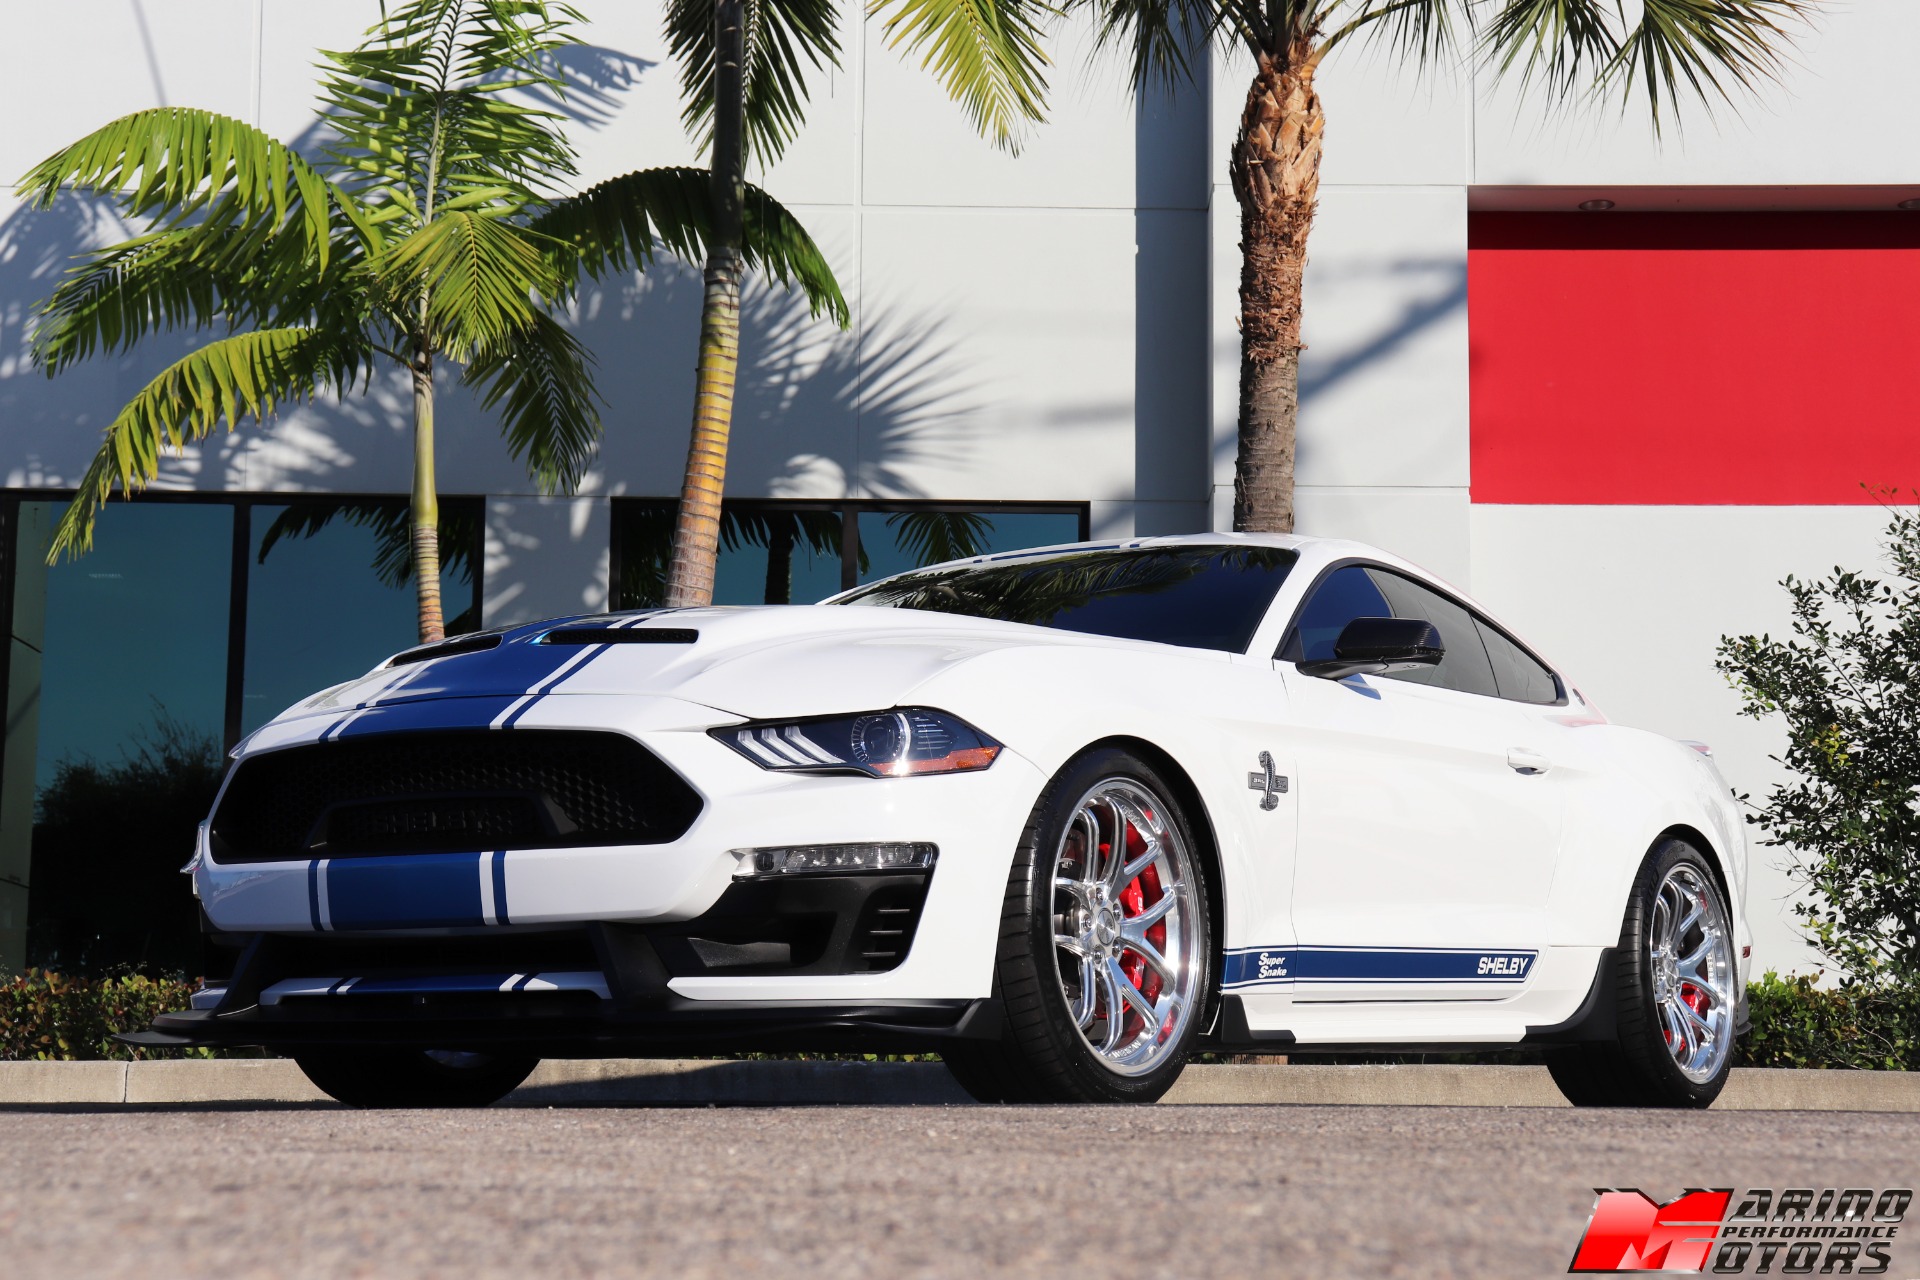 Used-2020-Ford-Mustang-Shelby-Super-Snake